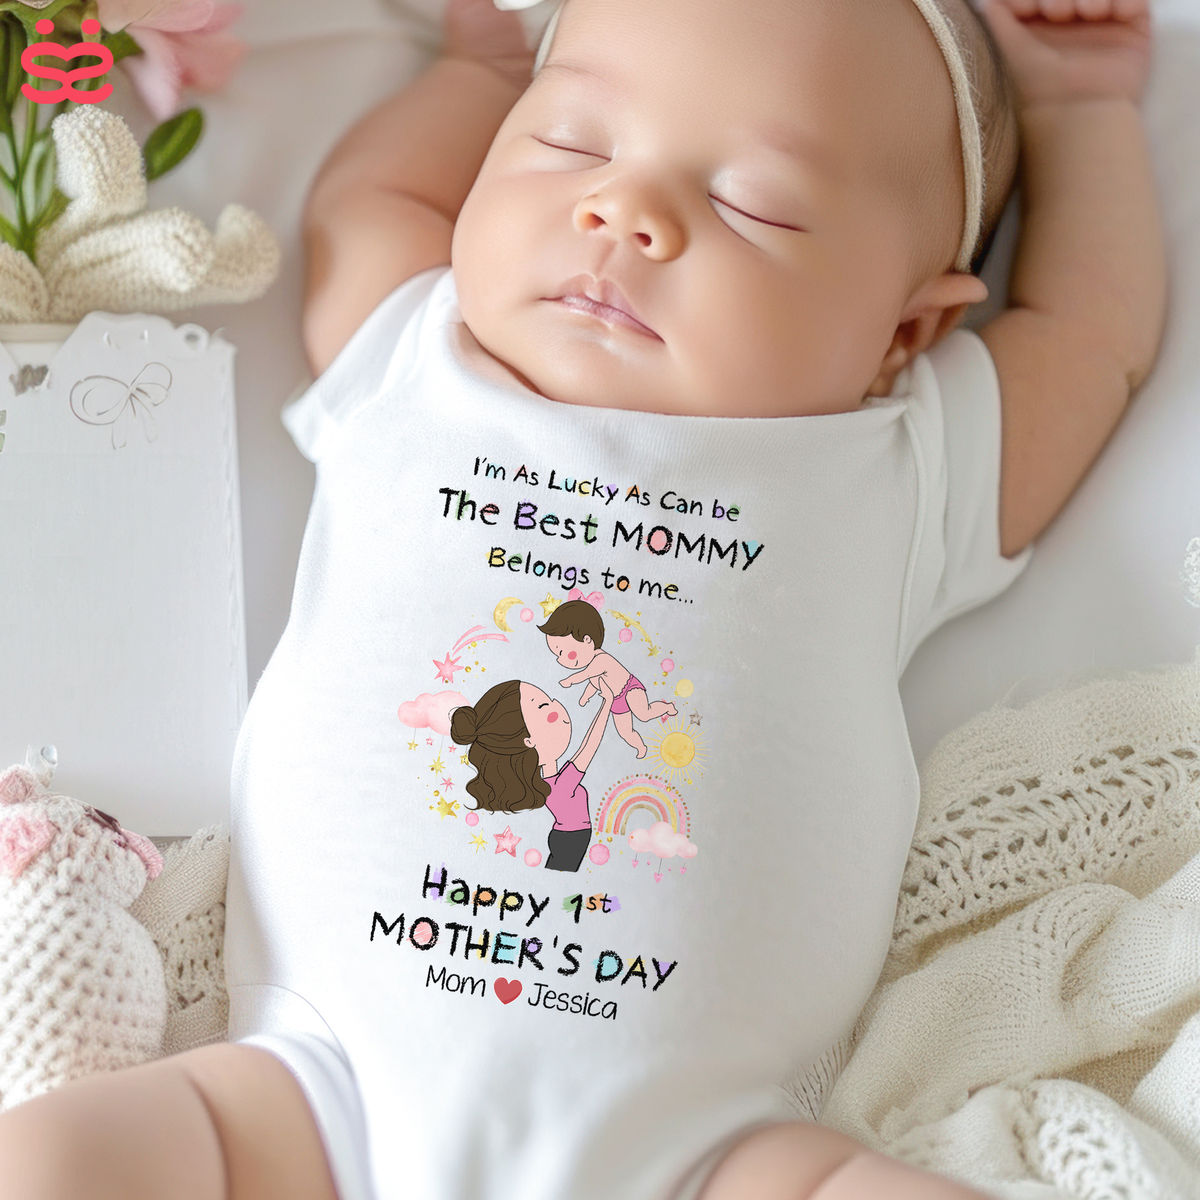 Personalized Onesie - Custom Baby Onesies - I’m As Lucky As Can be The Best Mommy Belongs to me...(43449) - Mother's Day 2024